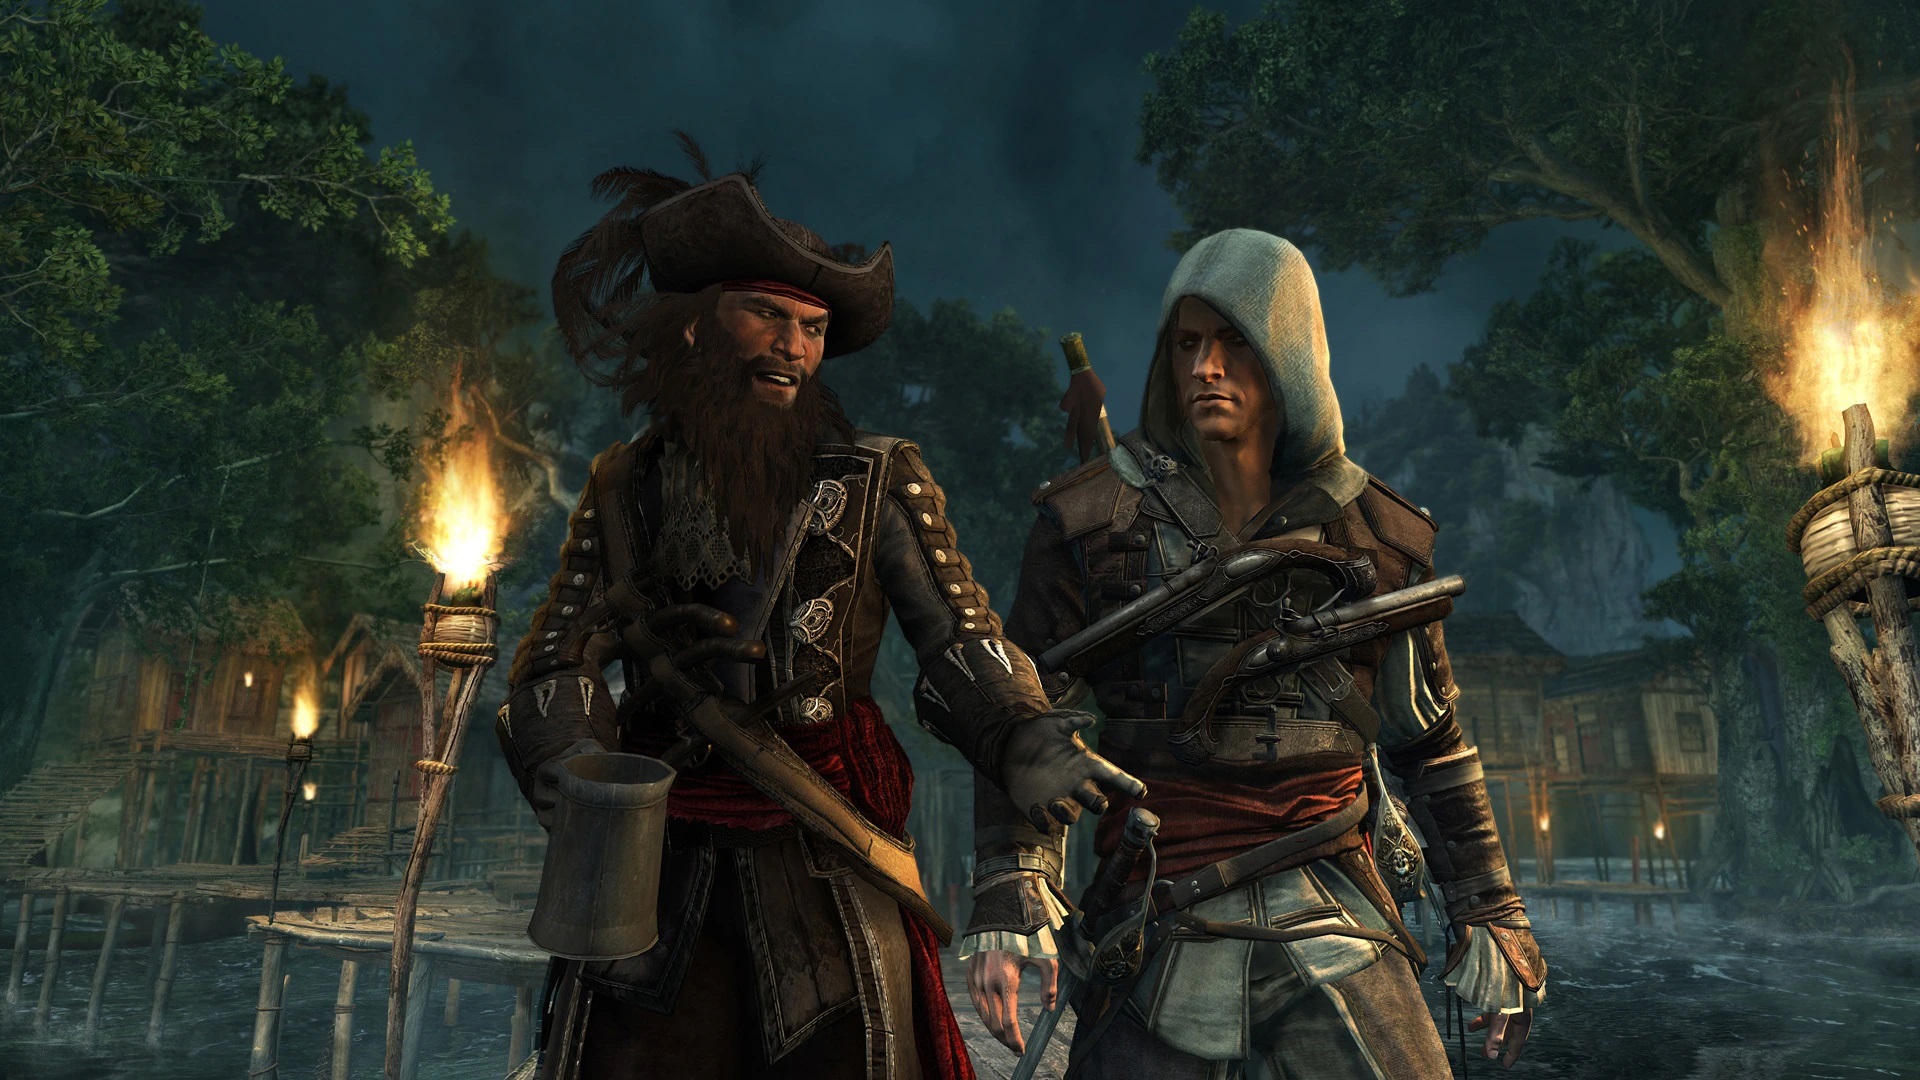 Assassin's Creed Black Flag sequel is a massive hit with fans